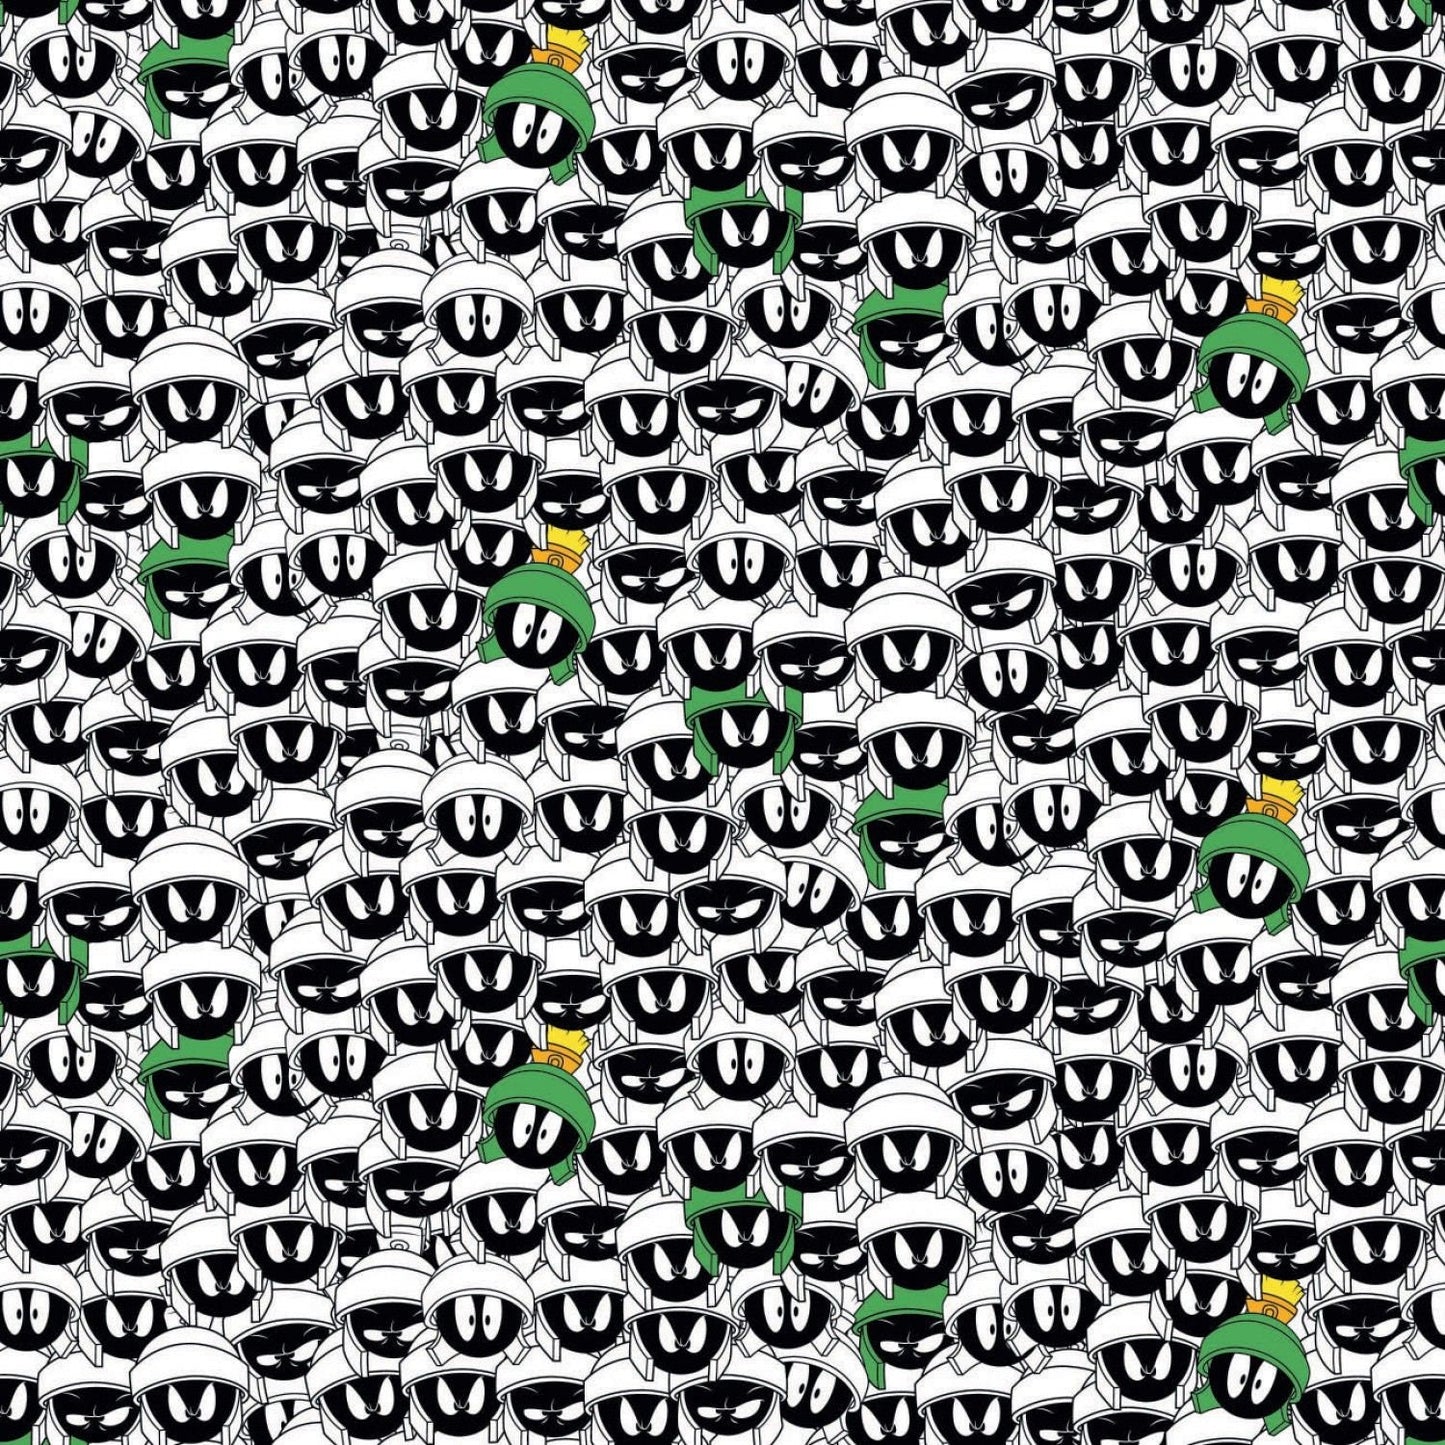 Licensed Looney Tunes 2 Marvin the Martian Stack 23600163-1 Cotton Woven Fabric